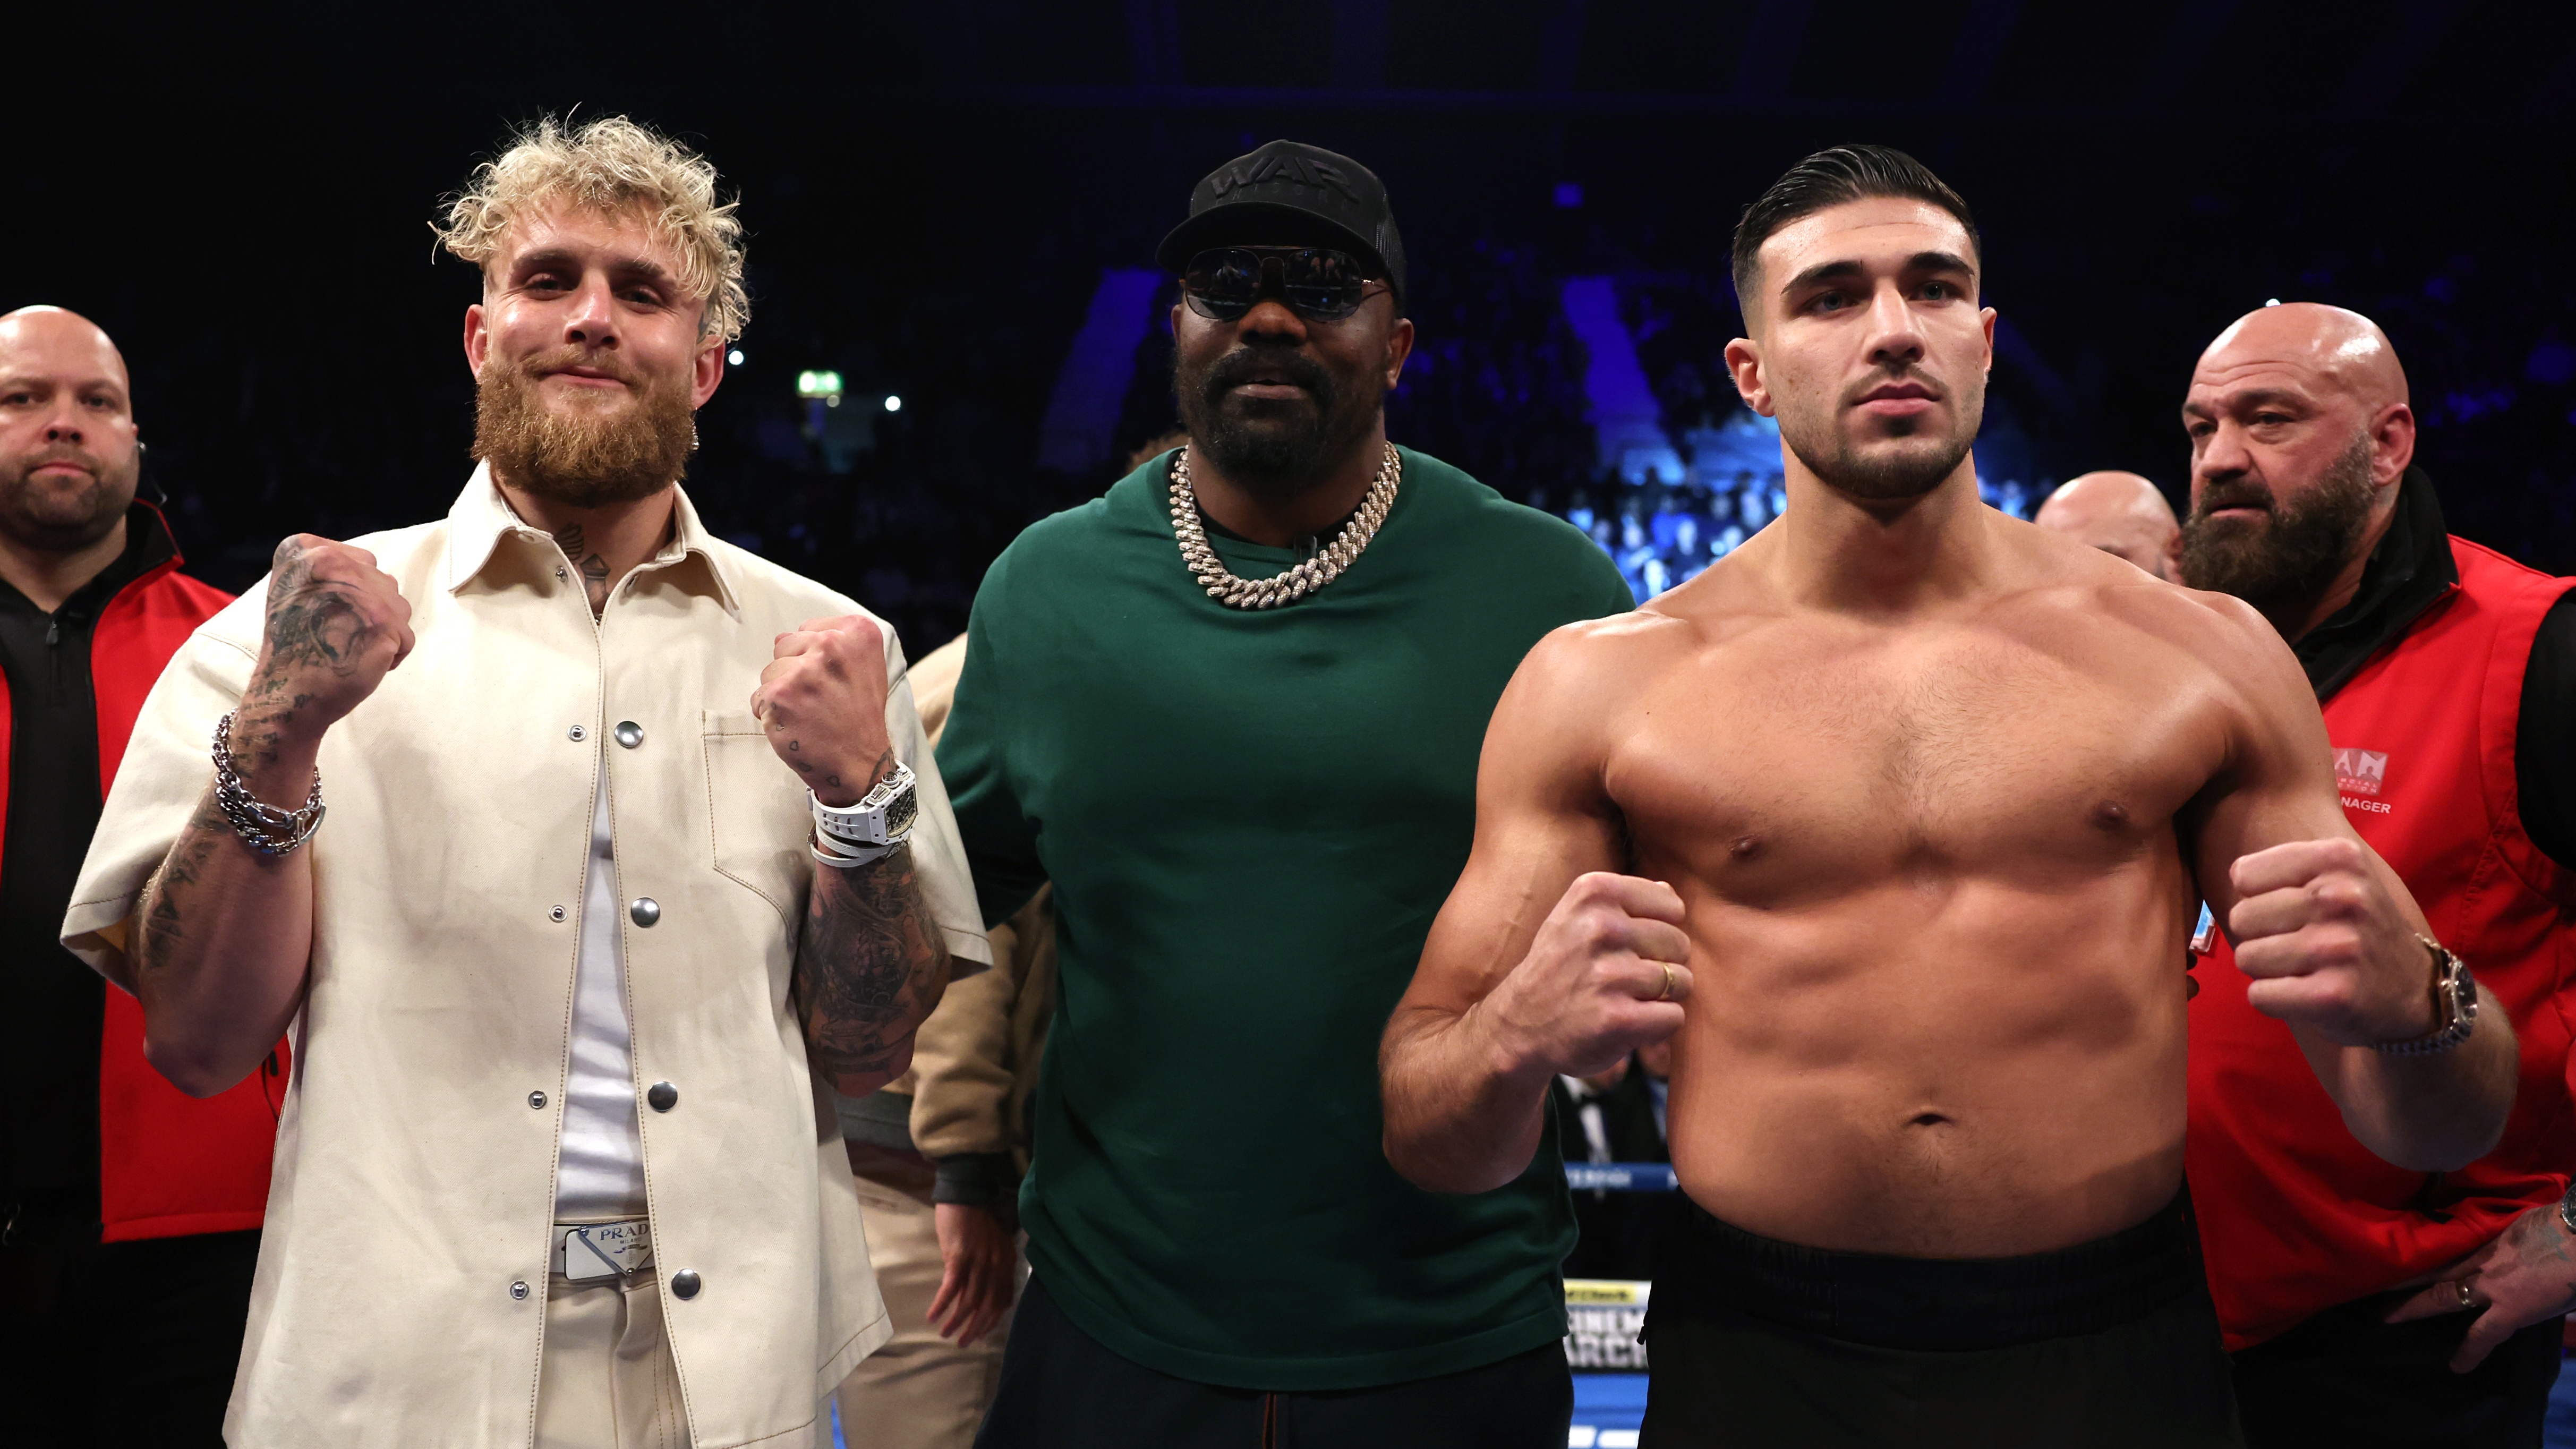 Jake Paul vs Tommy Fury live stream how to watch boxing fight online from anywhere TechRadar